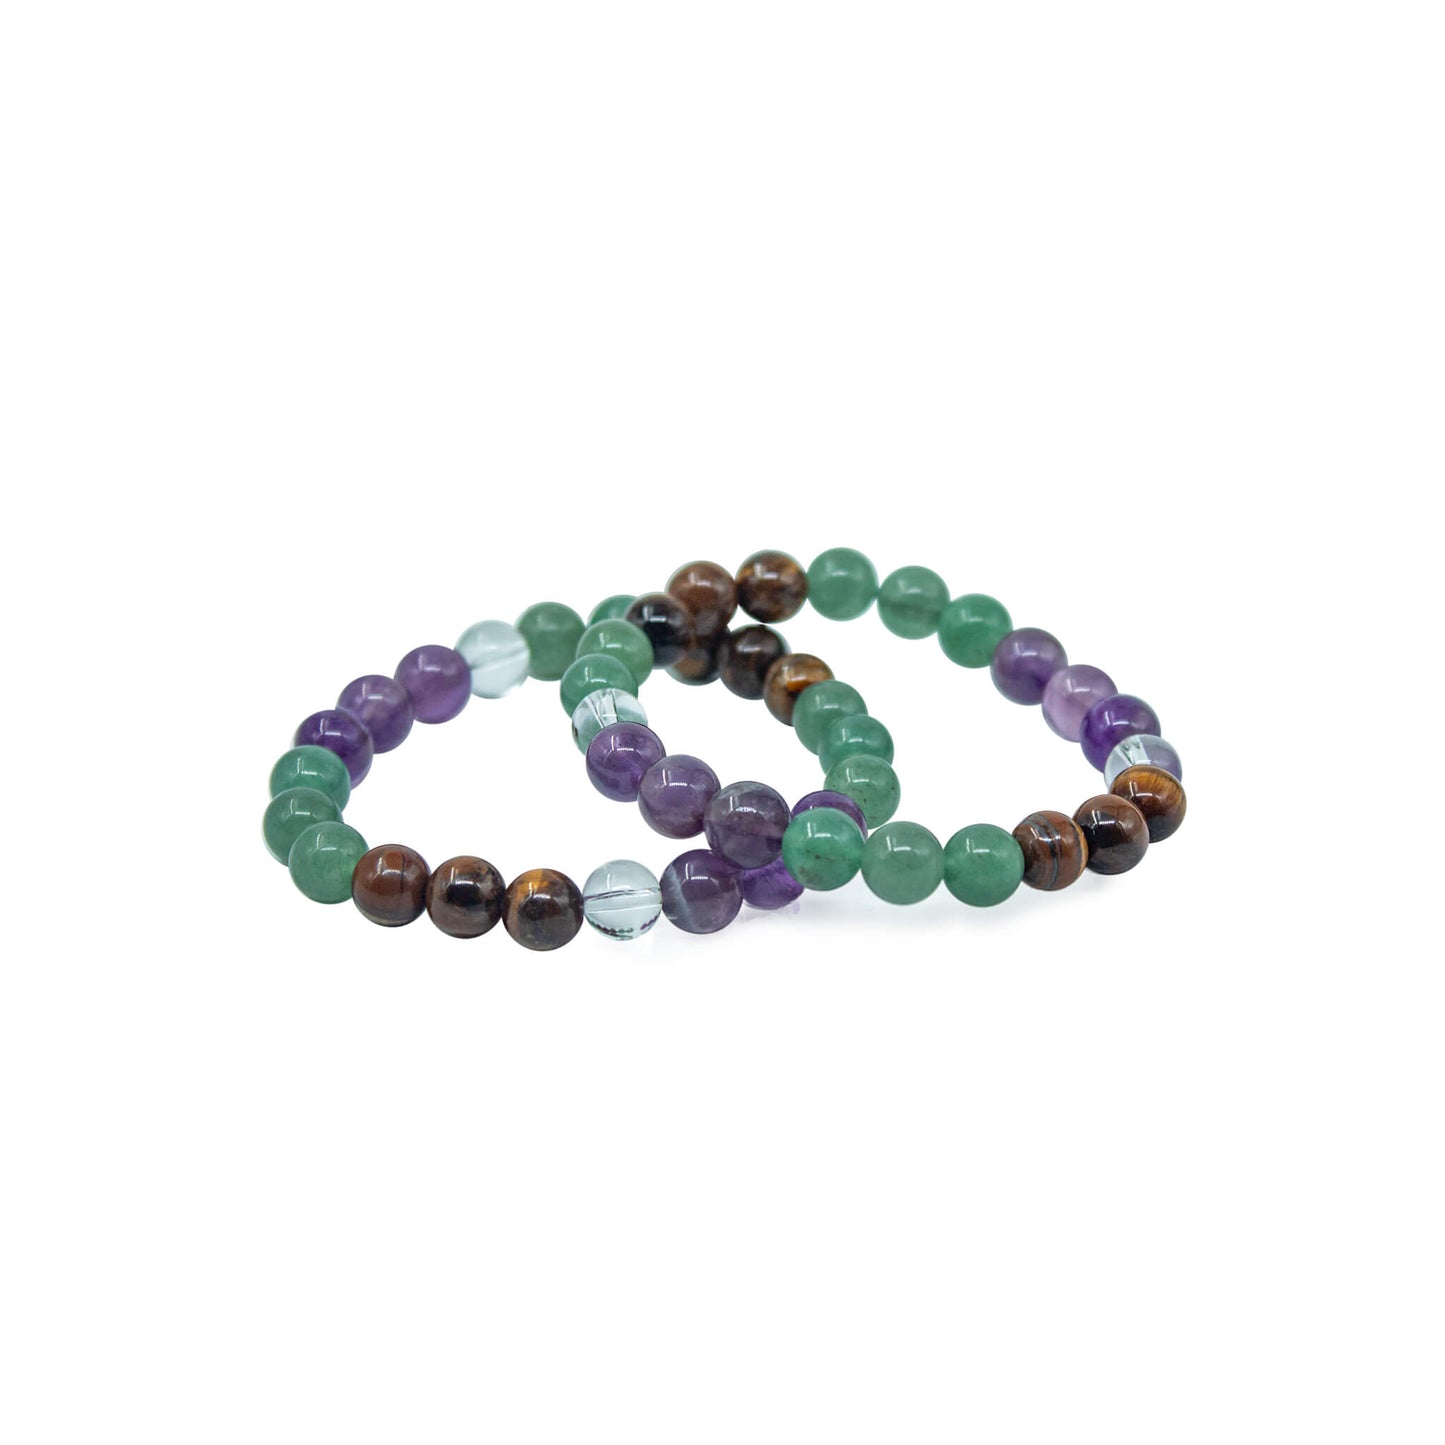 bracelet for focus, clarity, and mental agility